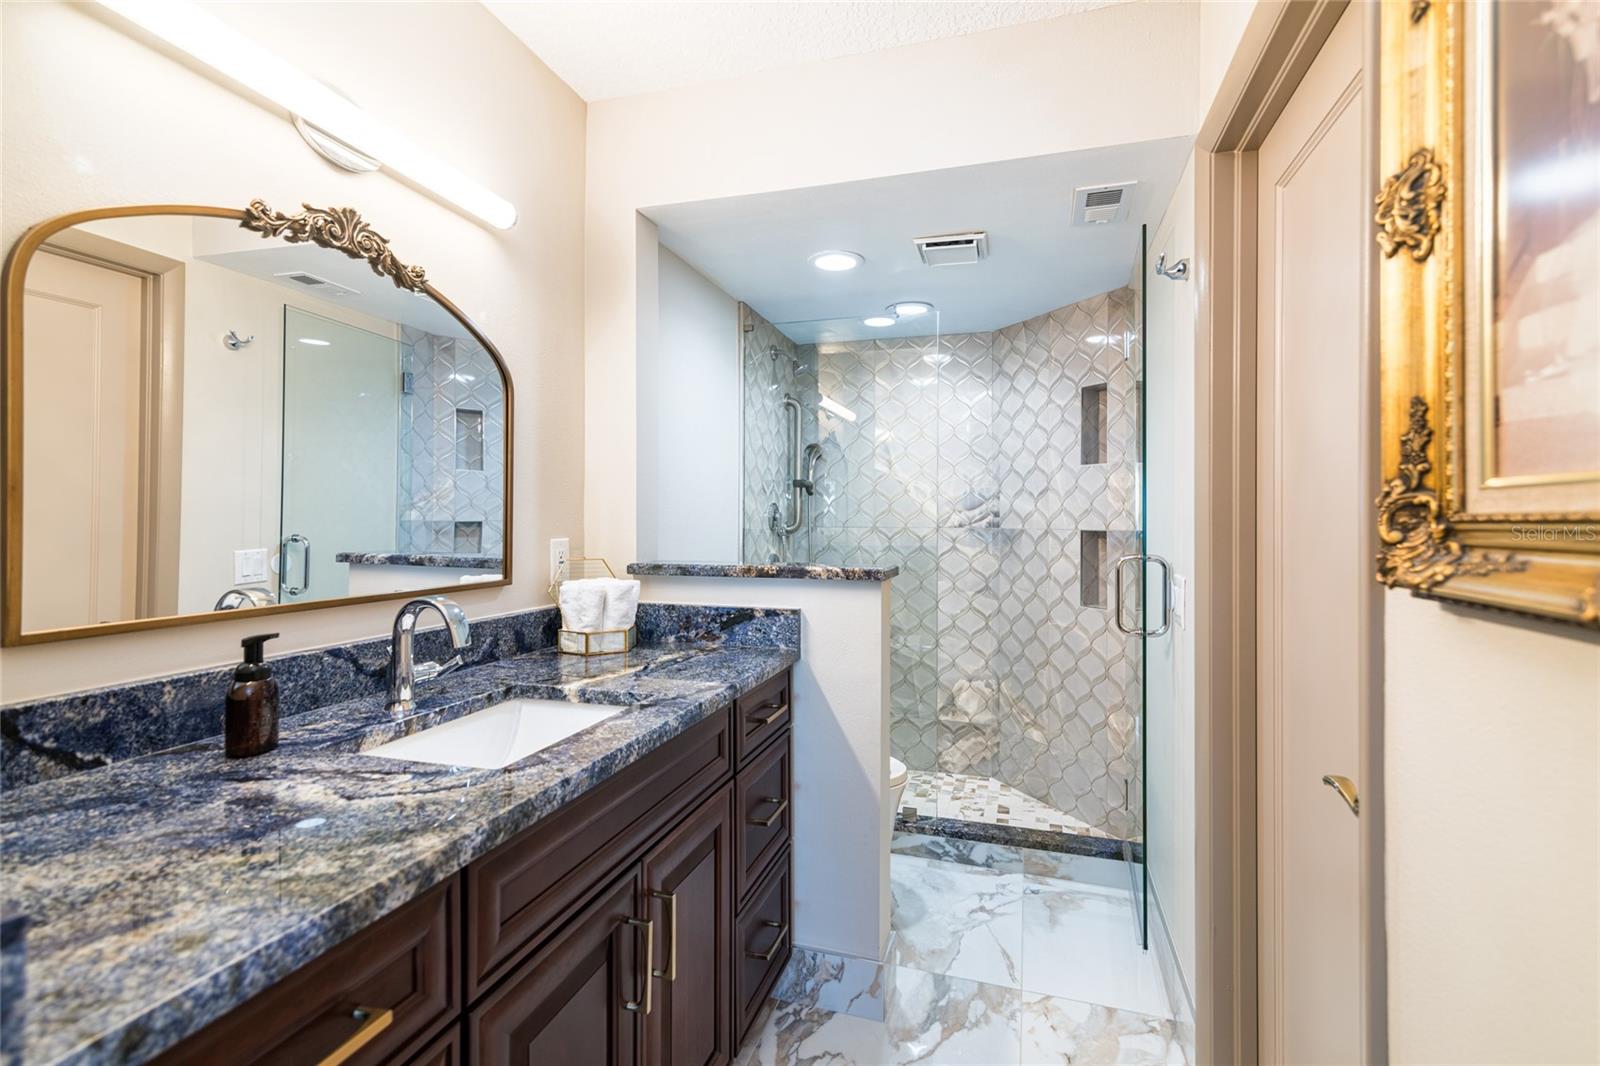 Master bathroom - blue granite counter top and exquisite tile work in the shower and just wait until you see the toilet - it is top of the line!!